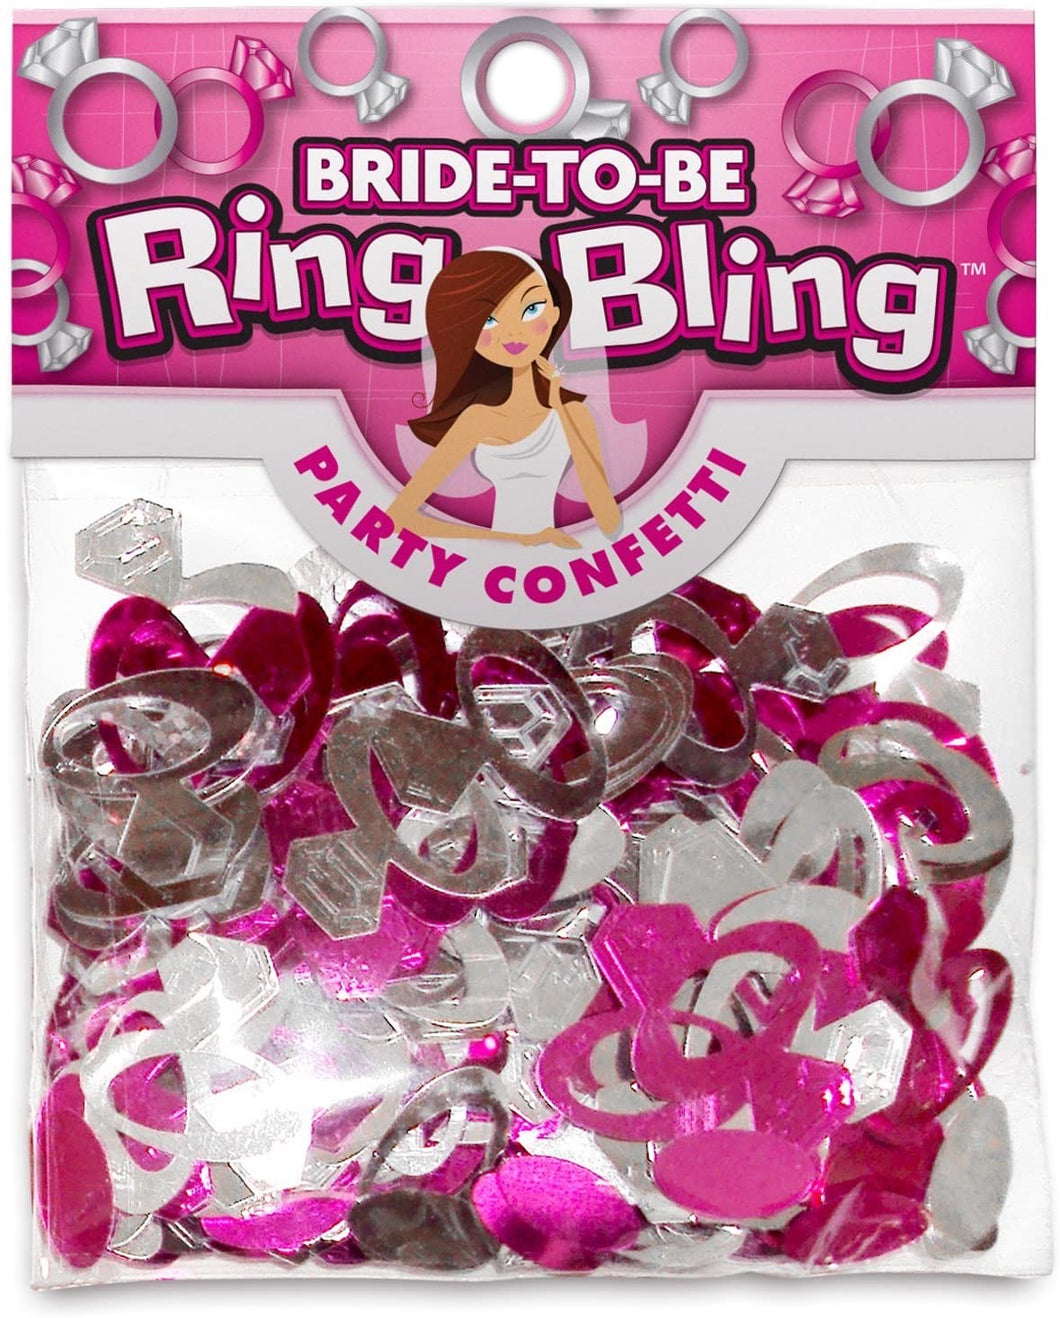 BRIDE-TO-BE RING BLING Party Confetti